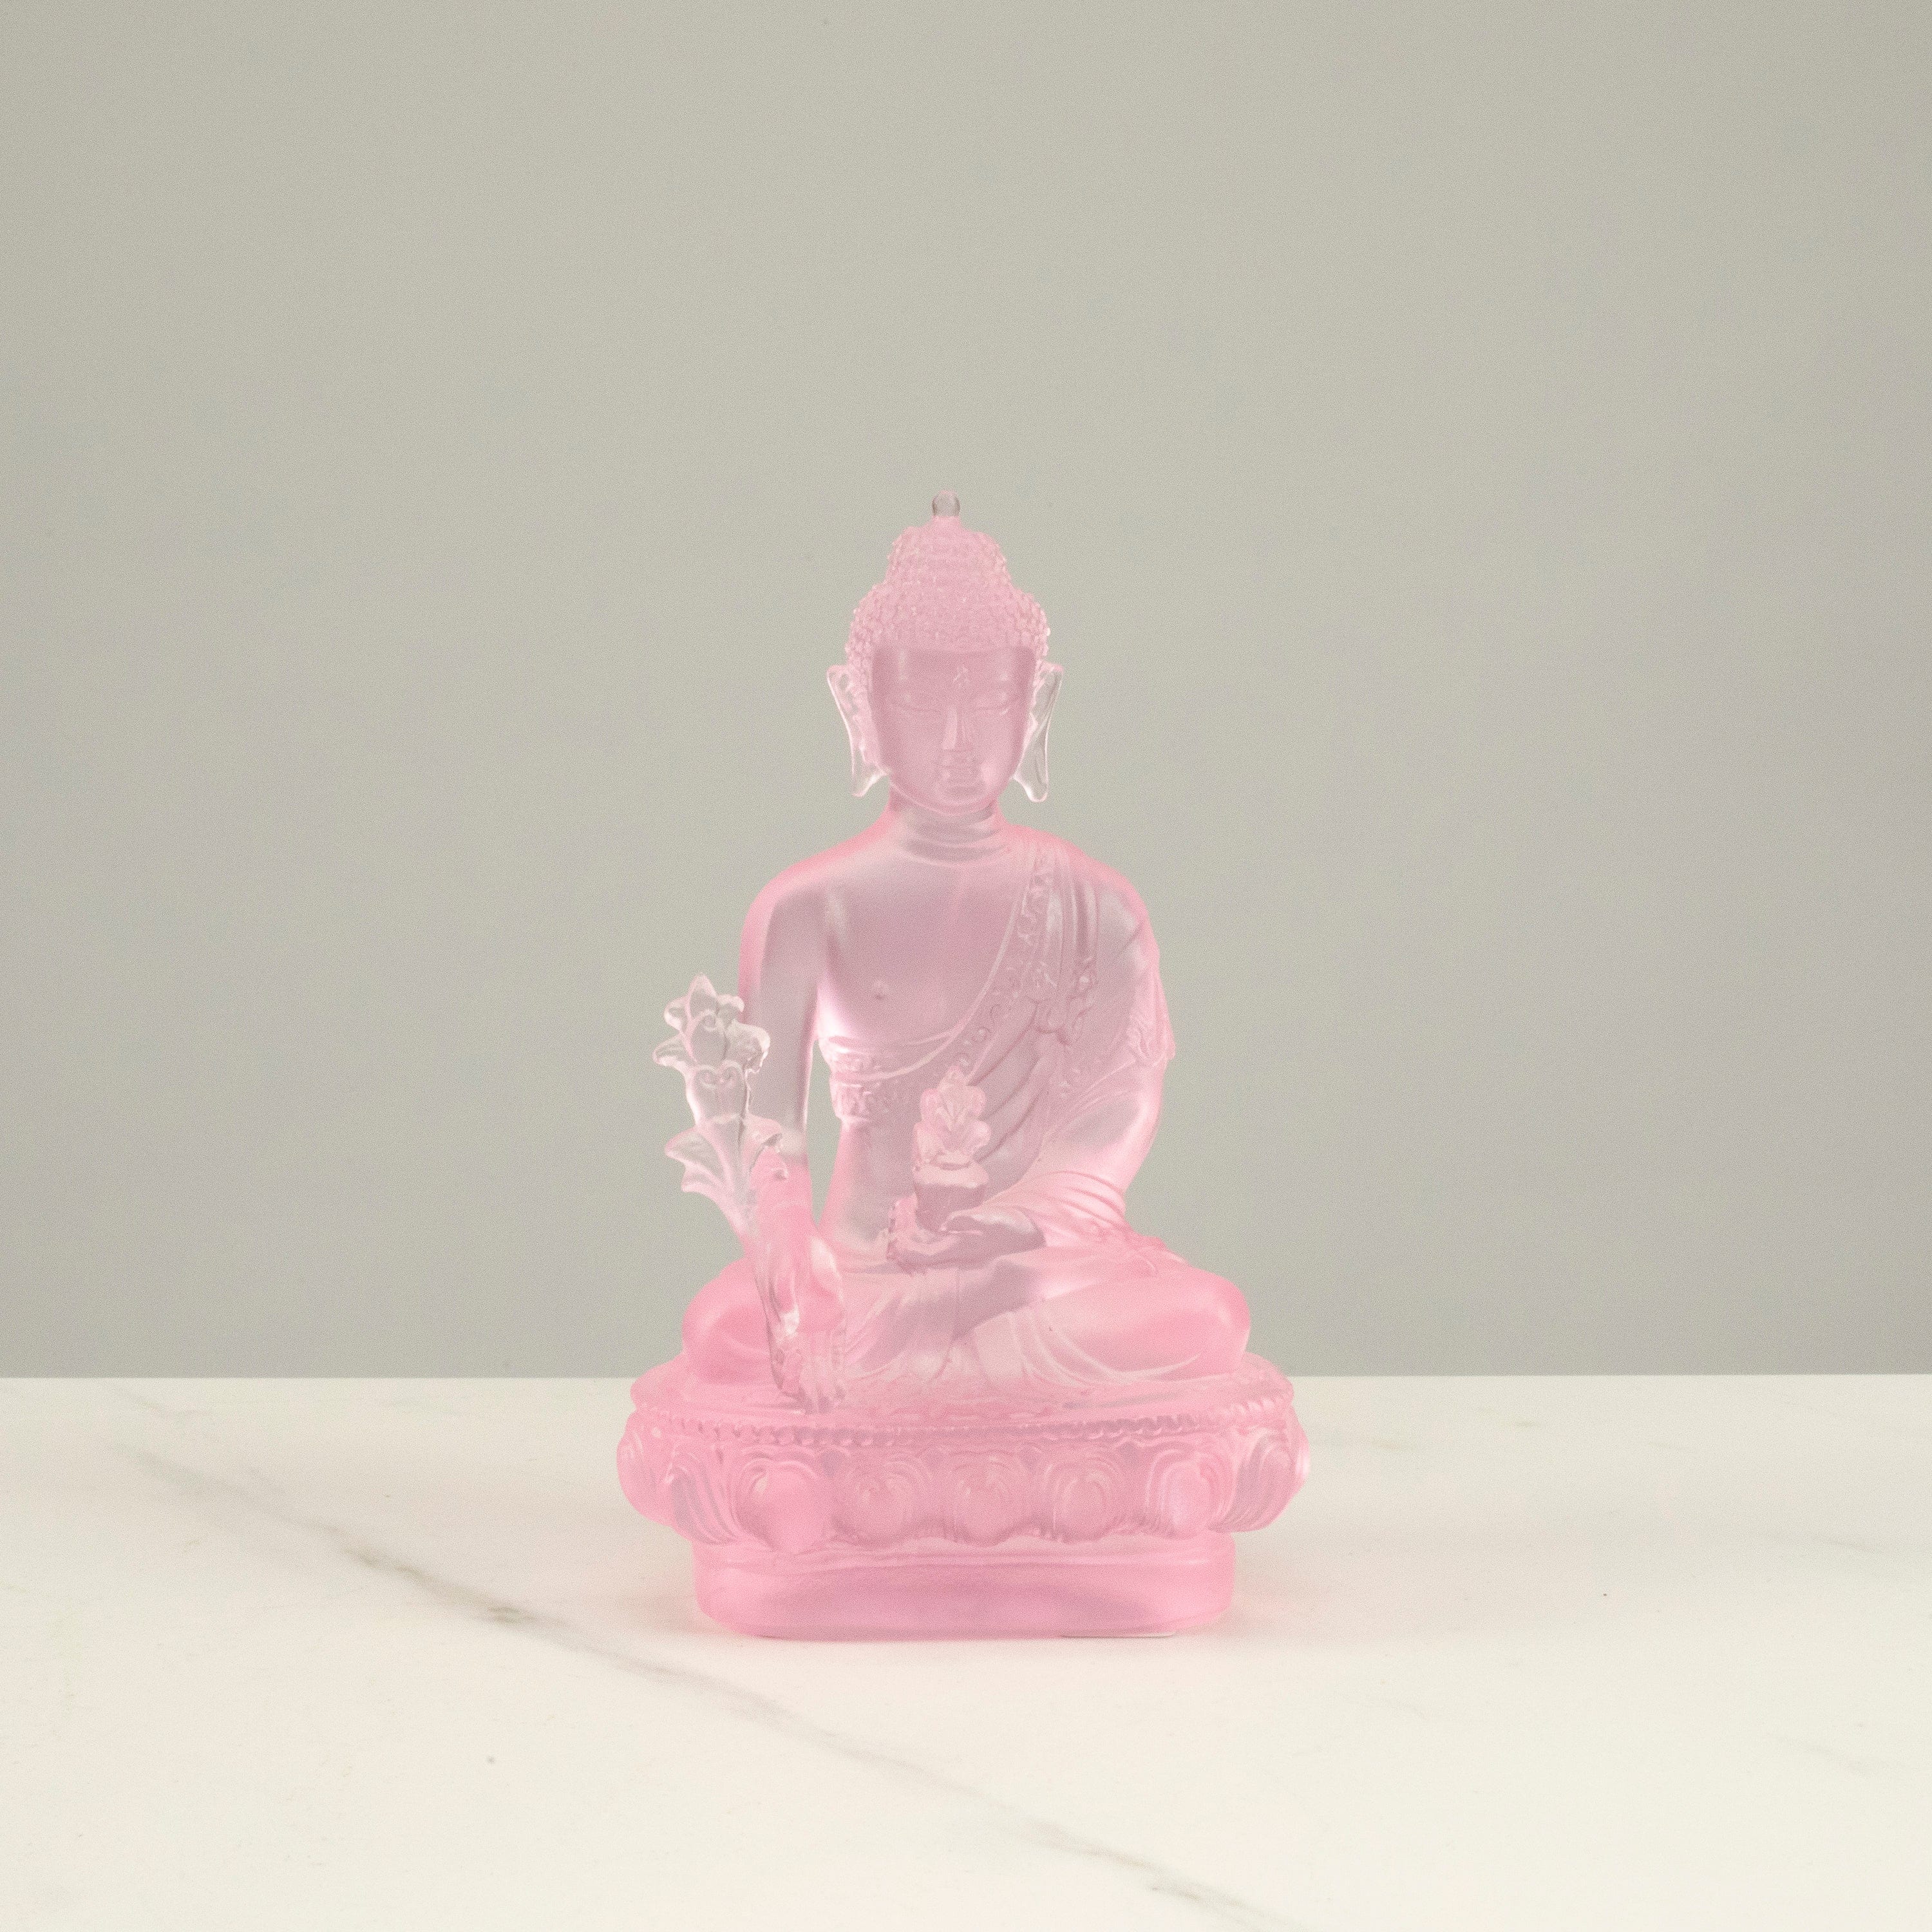 Kalifano Crystal Carving Divine Pink Guan Yin Crystal Carving - A Symbol of Compassion and Protection CRB110-PK